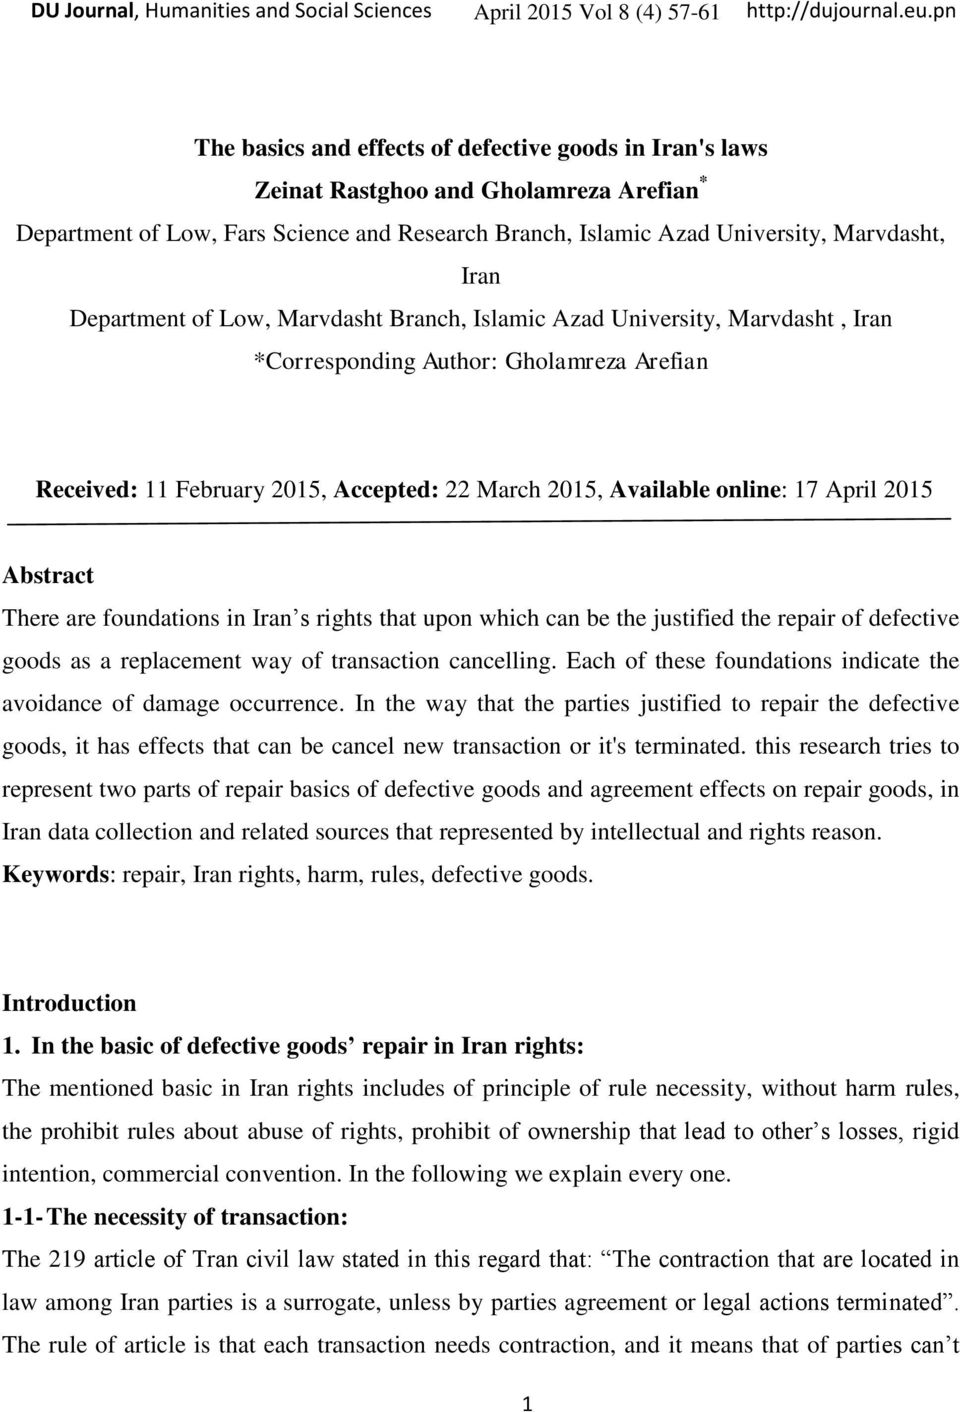 2015 Abstract There are foundations in Iran s rights that upon which can be the justified the repair of defective goods as a replacement way of transaction cancelling.